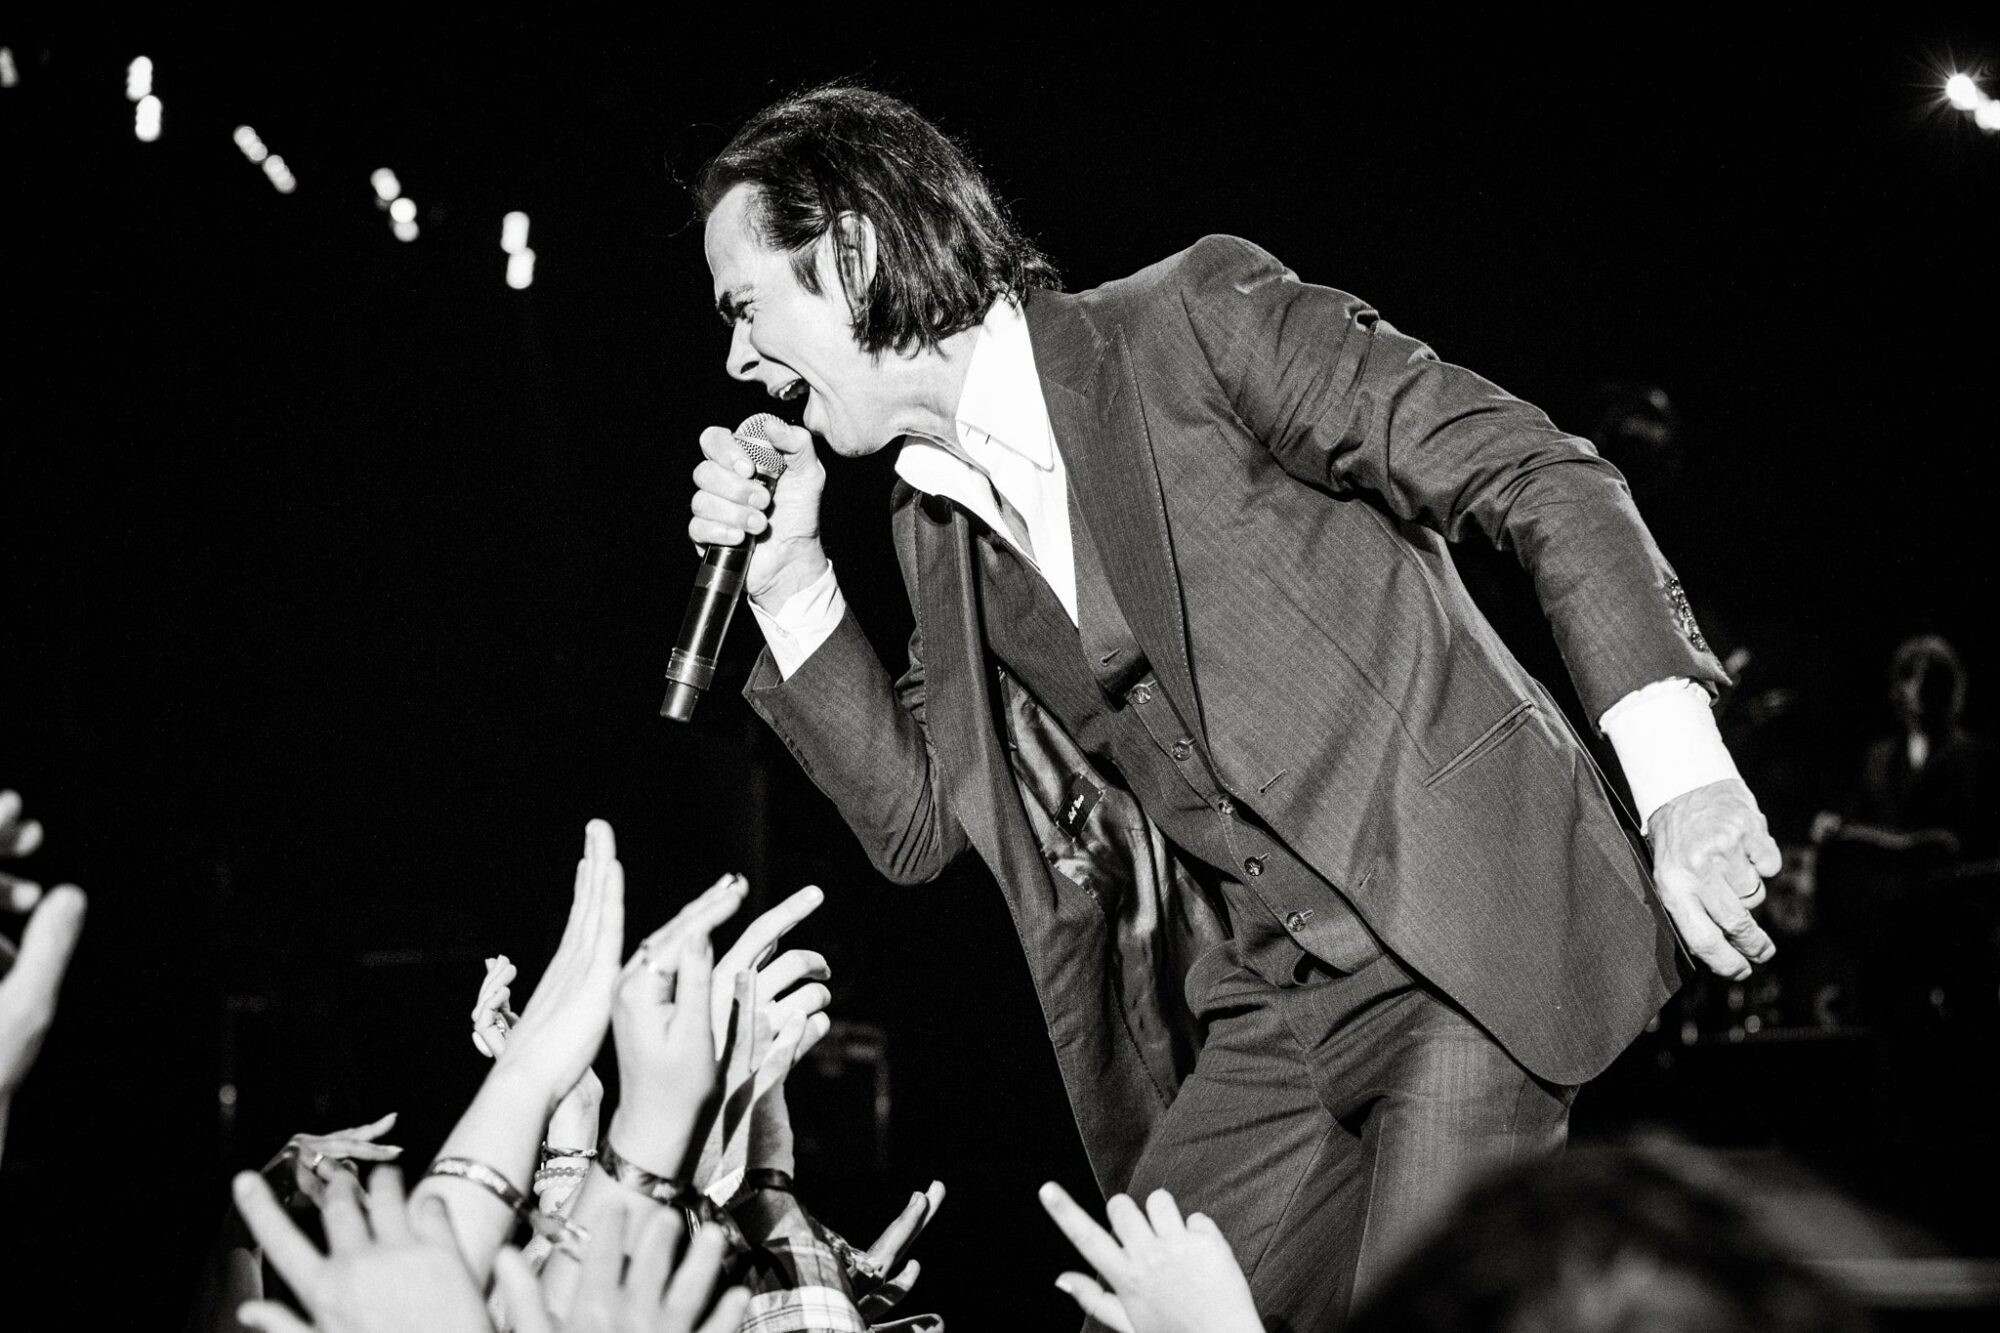 Image name Nick Cave Premium Package The Luxury Experience at First Direct Arena Leeds the 1 image from the post Nick Cave - Premium Package - the Mixer at First Direct Arena, Leeds in Yorkshire.com.